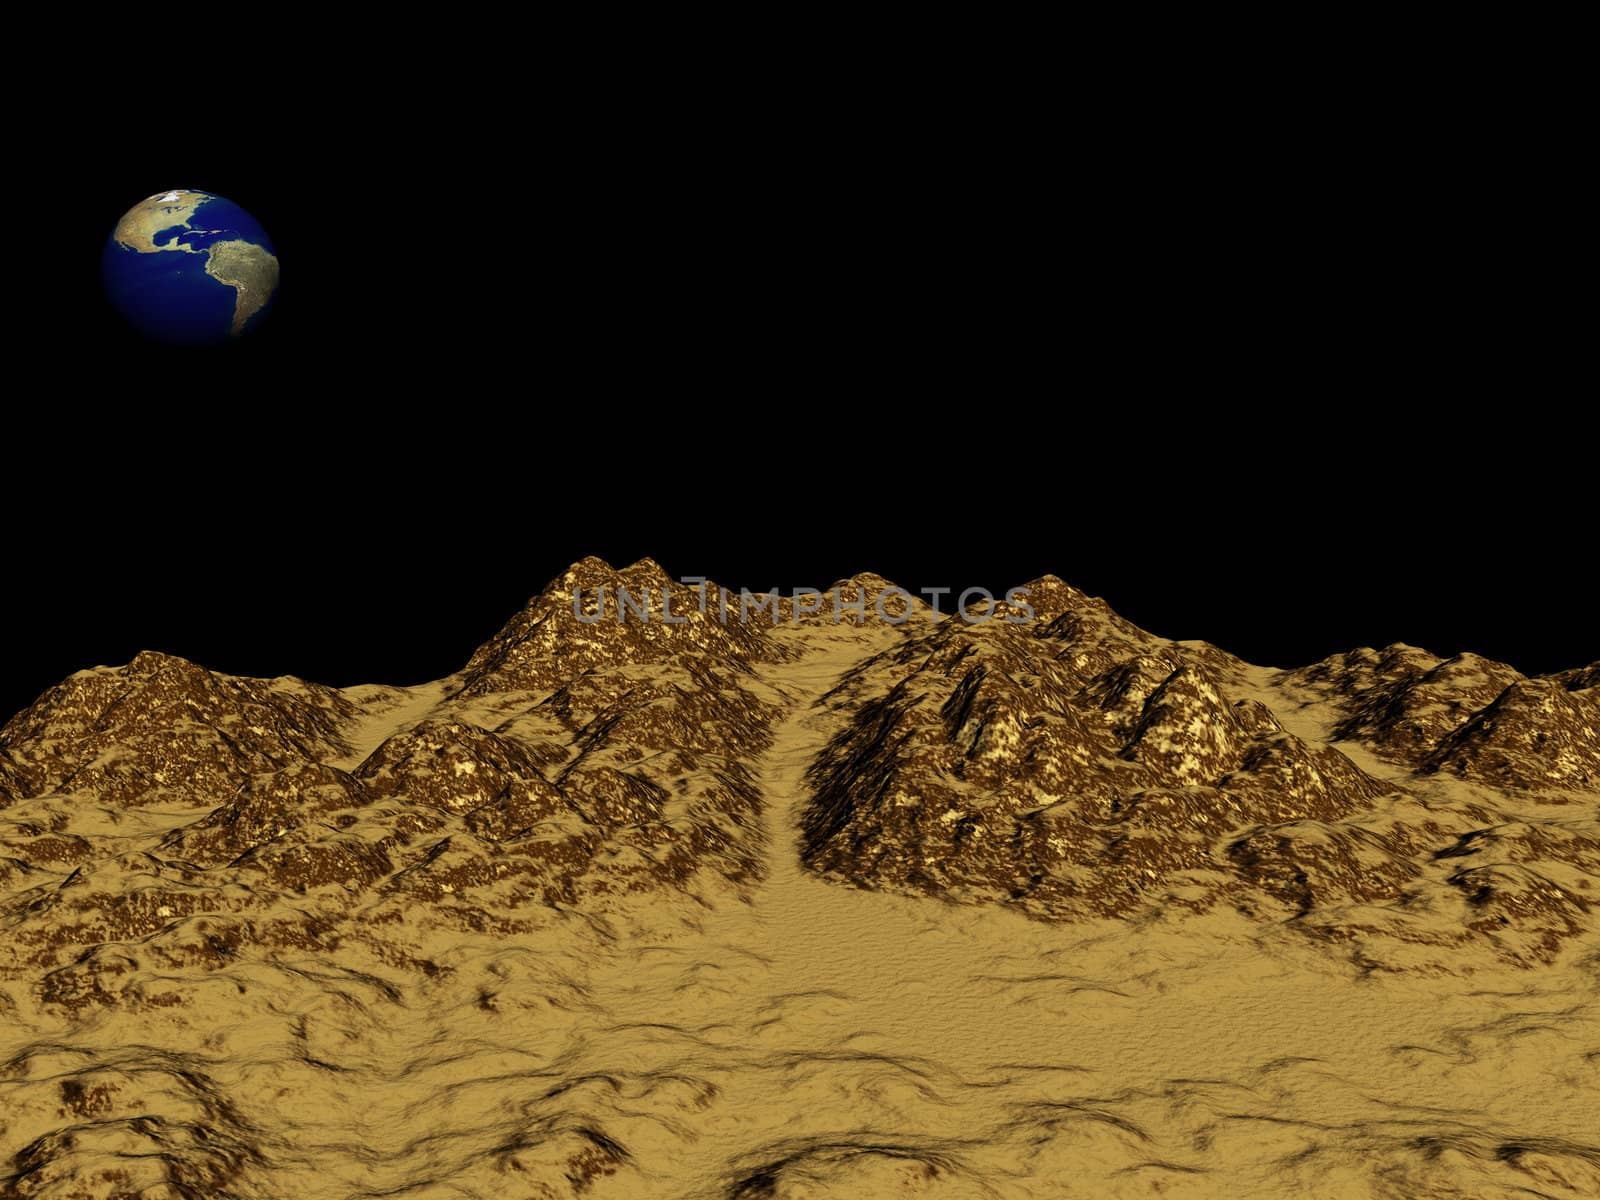 Sandy wild landscape and cloudy globe.
3d rendering.